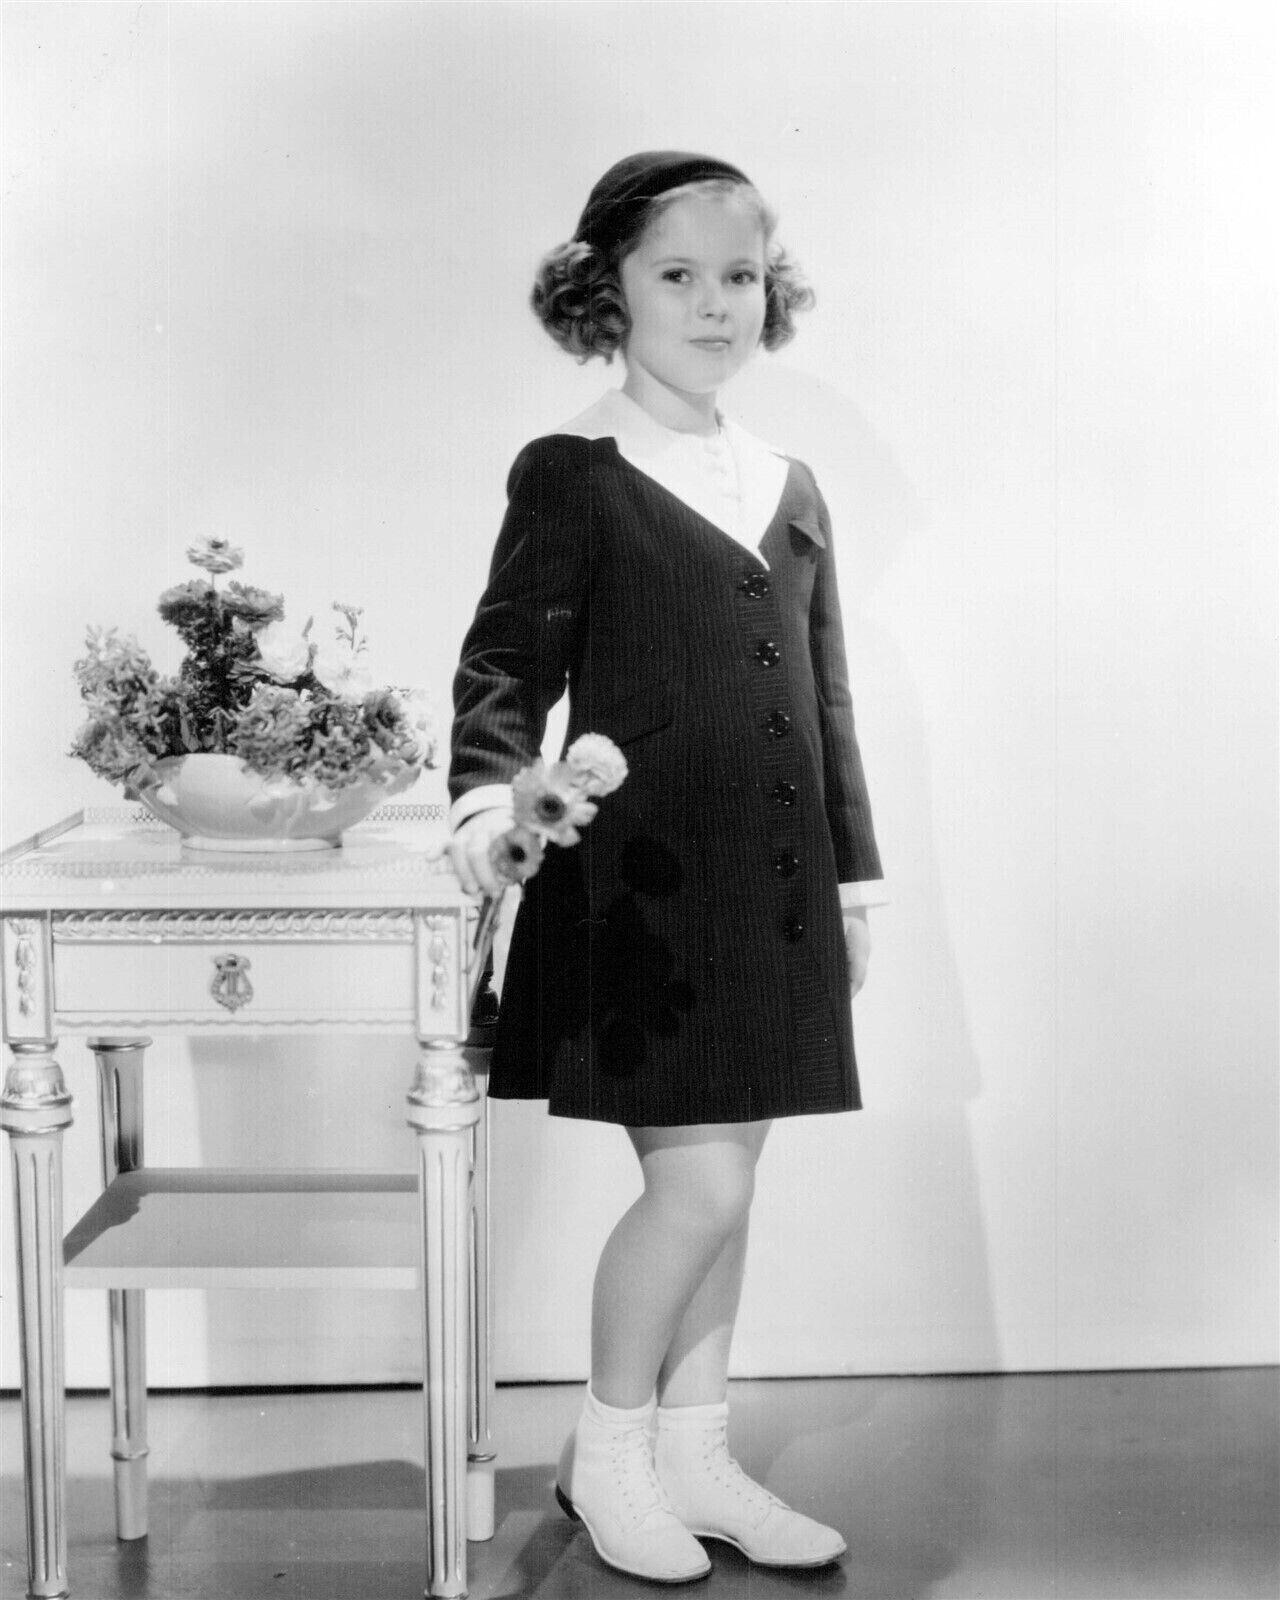 Shirley Temple holding flowers in coat and hat 4x6 inch photo